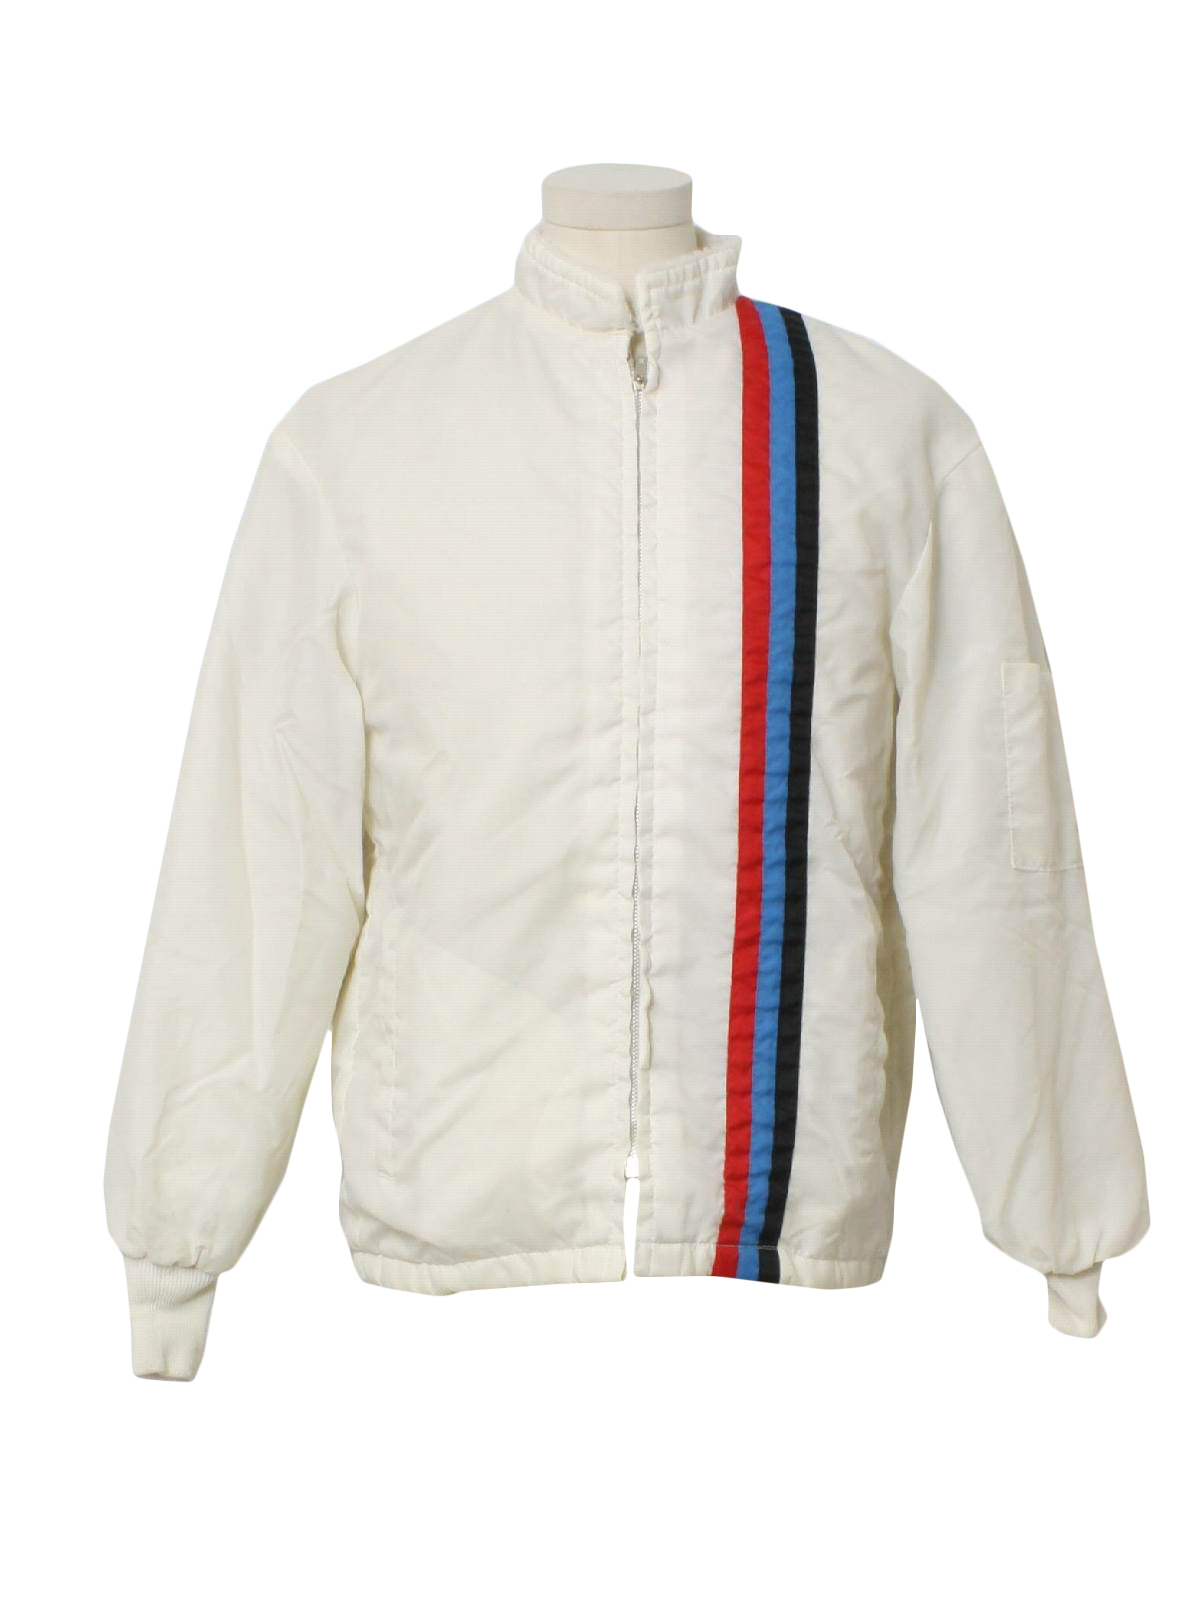 80's Vintage Jacket: 80s -Great Lakes Sportswear- Mens white background ...